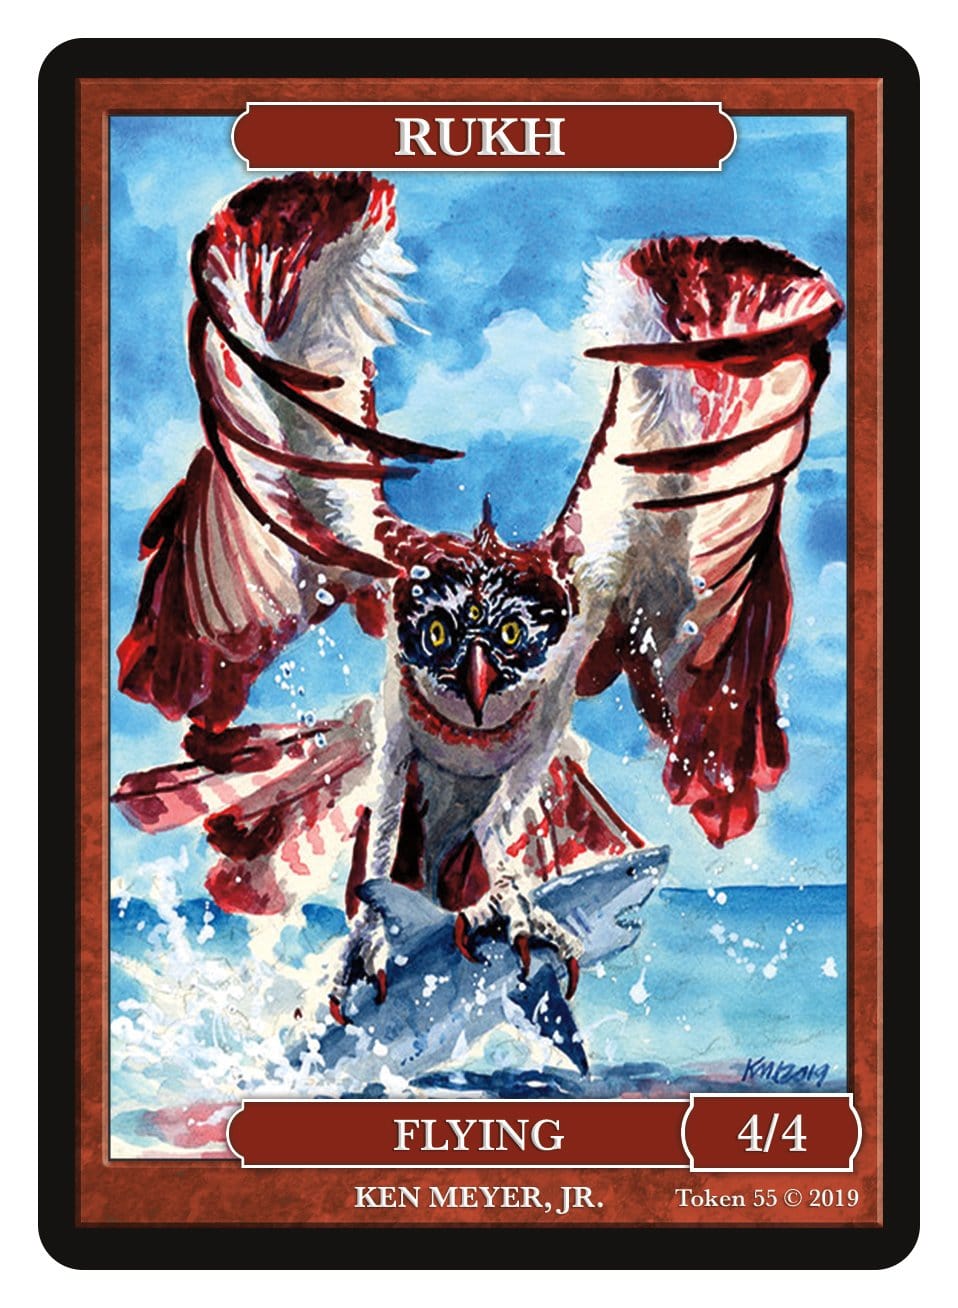 Rukh Token (4/4 - Flying) by Ken Meyer Jr. - Token - Original Magic Art - Accessories for Magic the Gathering and other card games